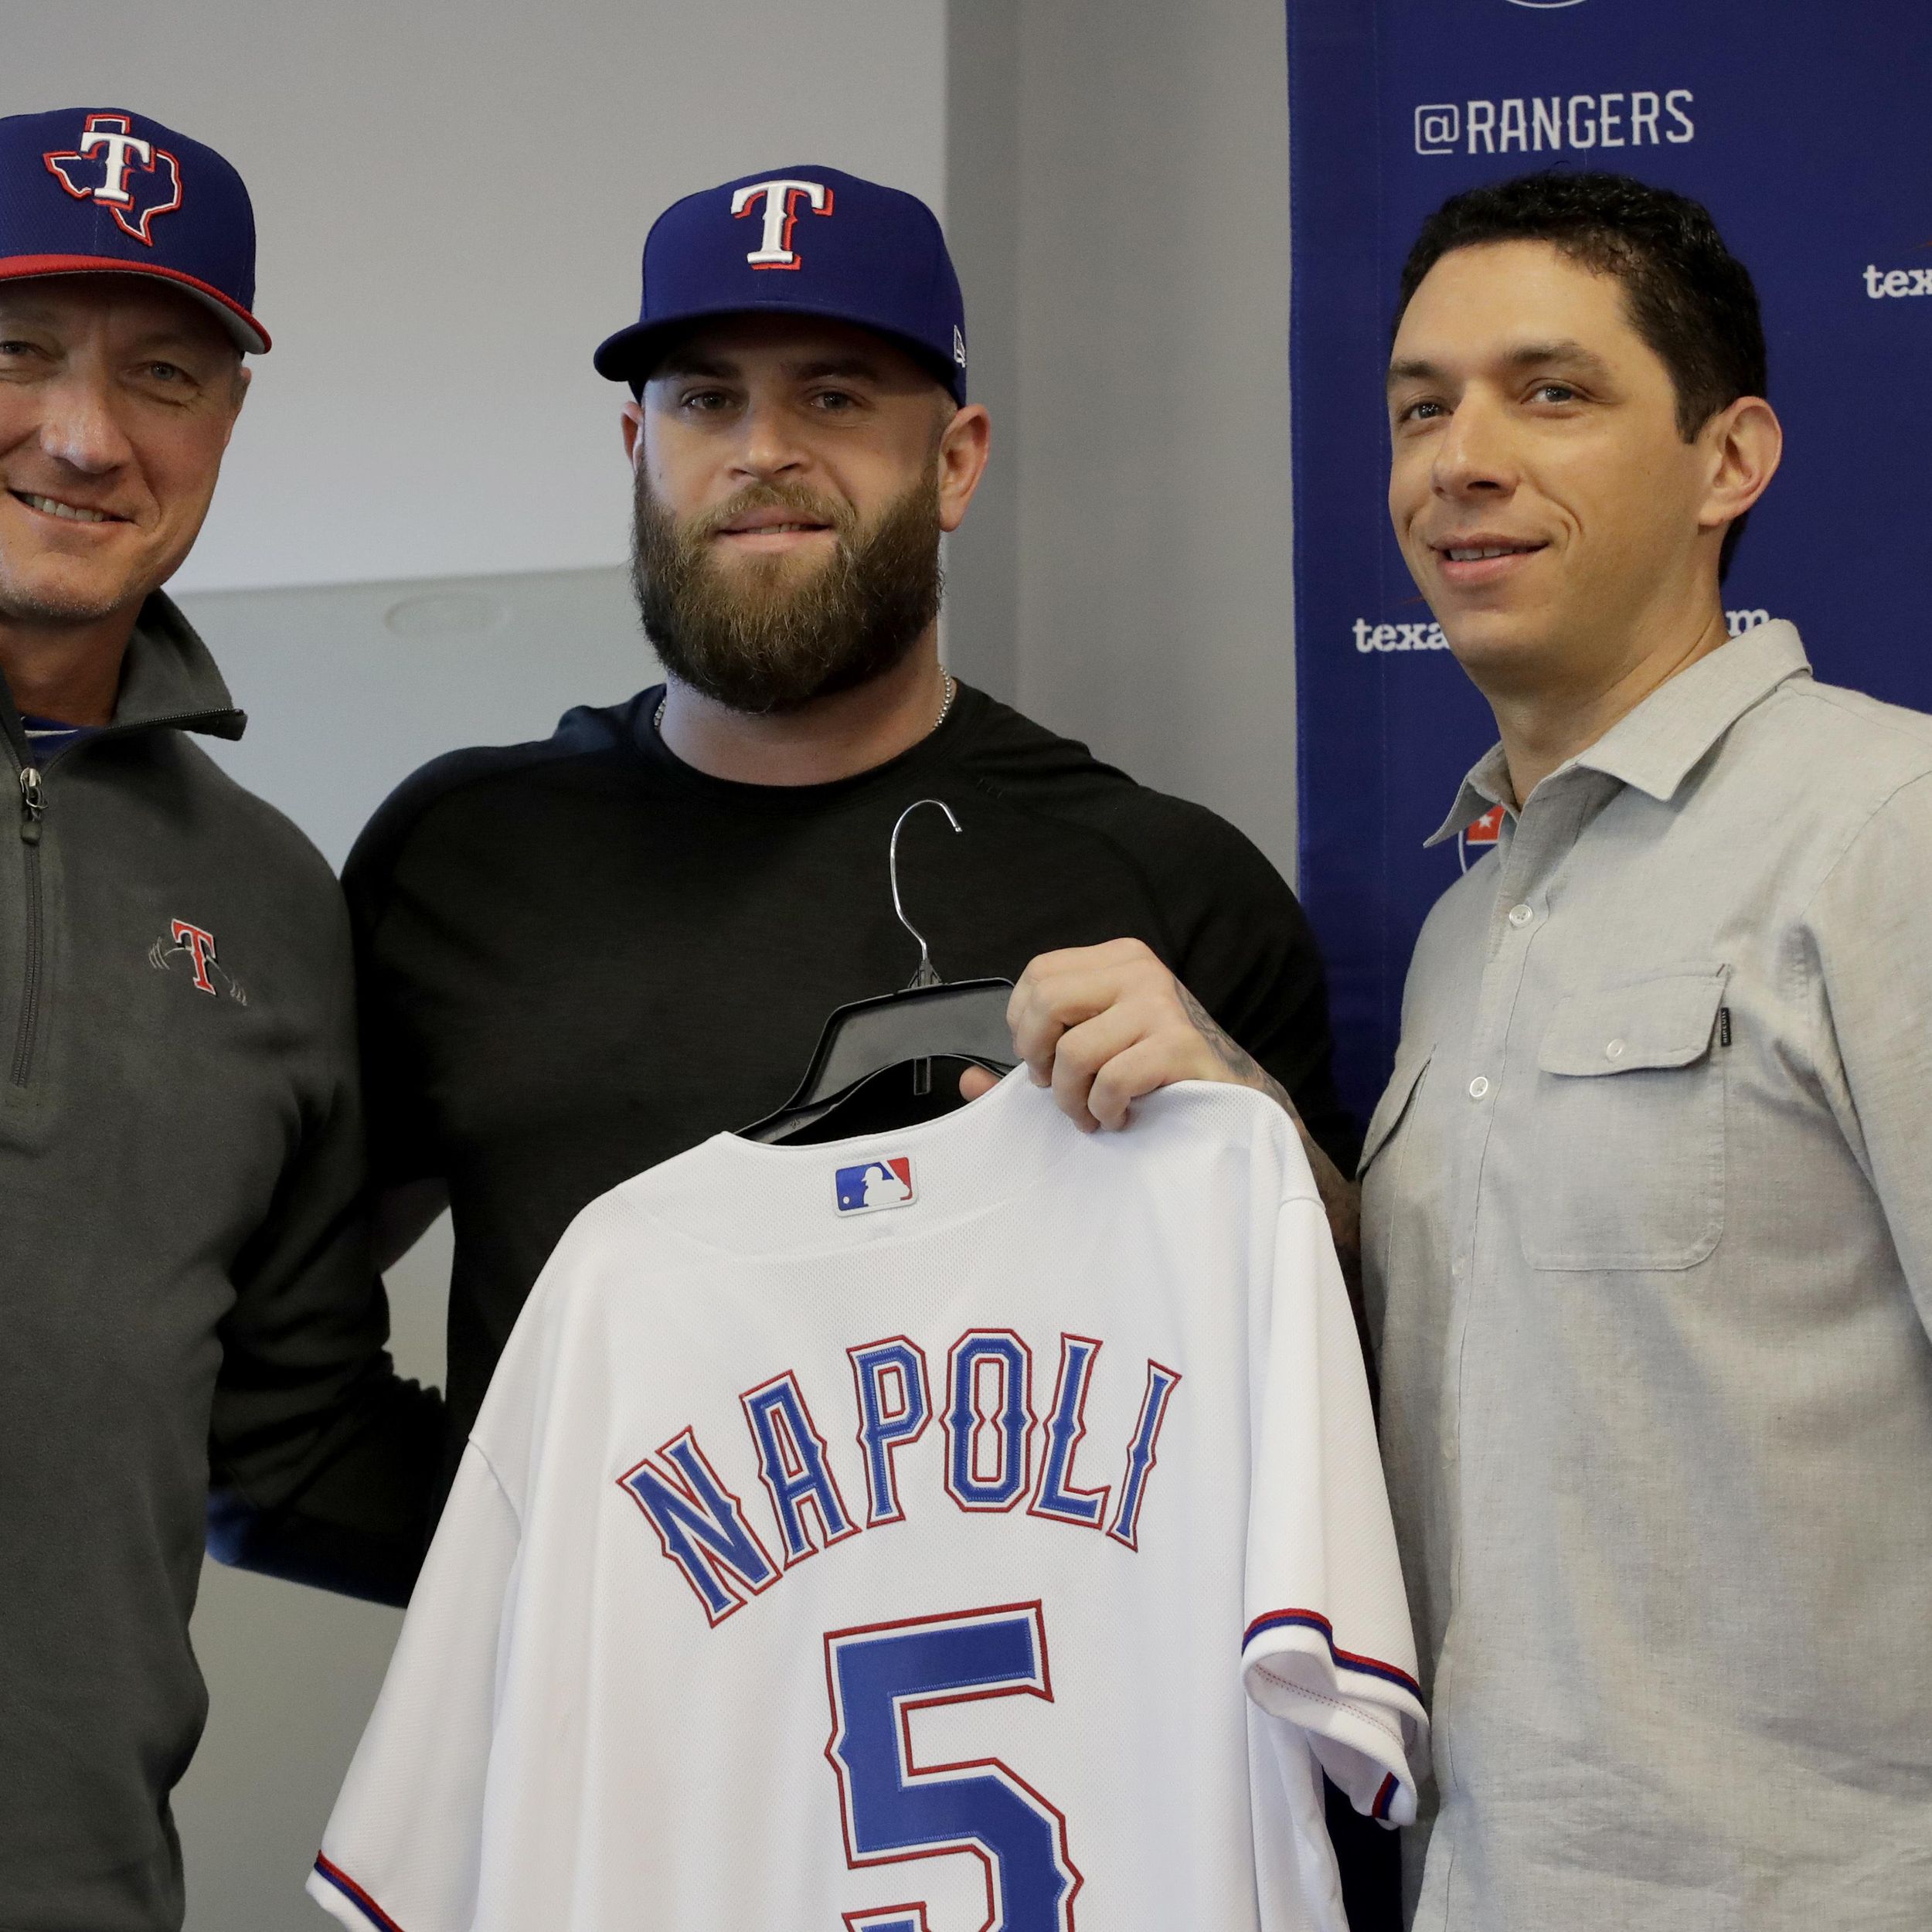 Nap time: Rangers, Mike Napoli finally reunited for 3rd stint